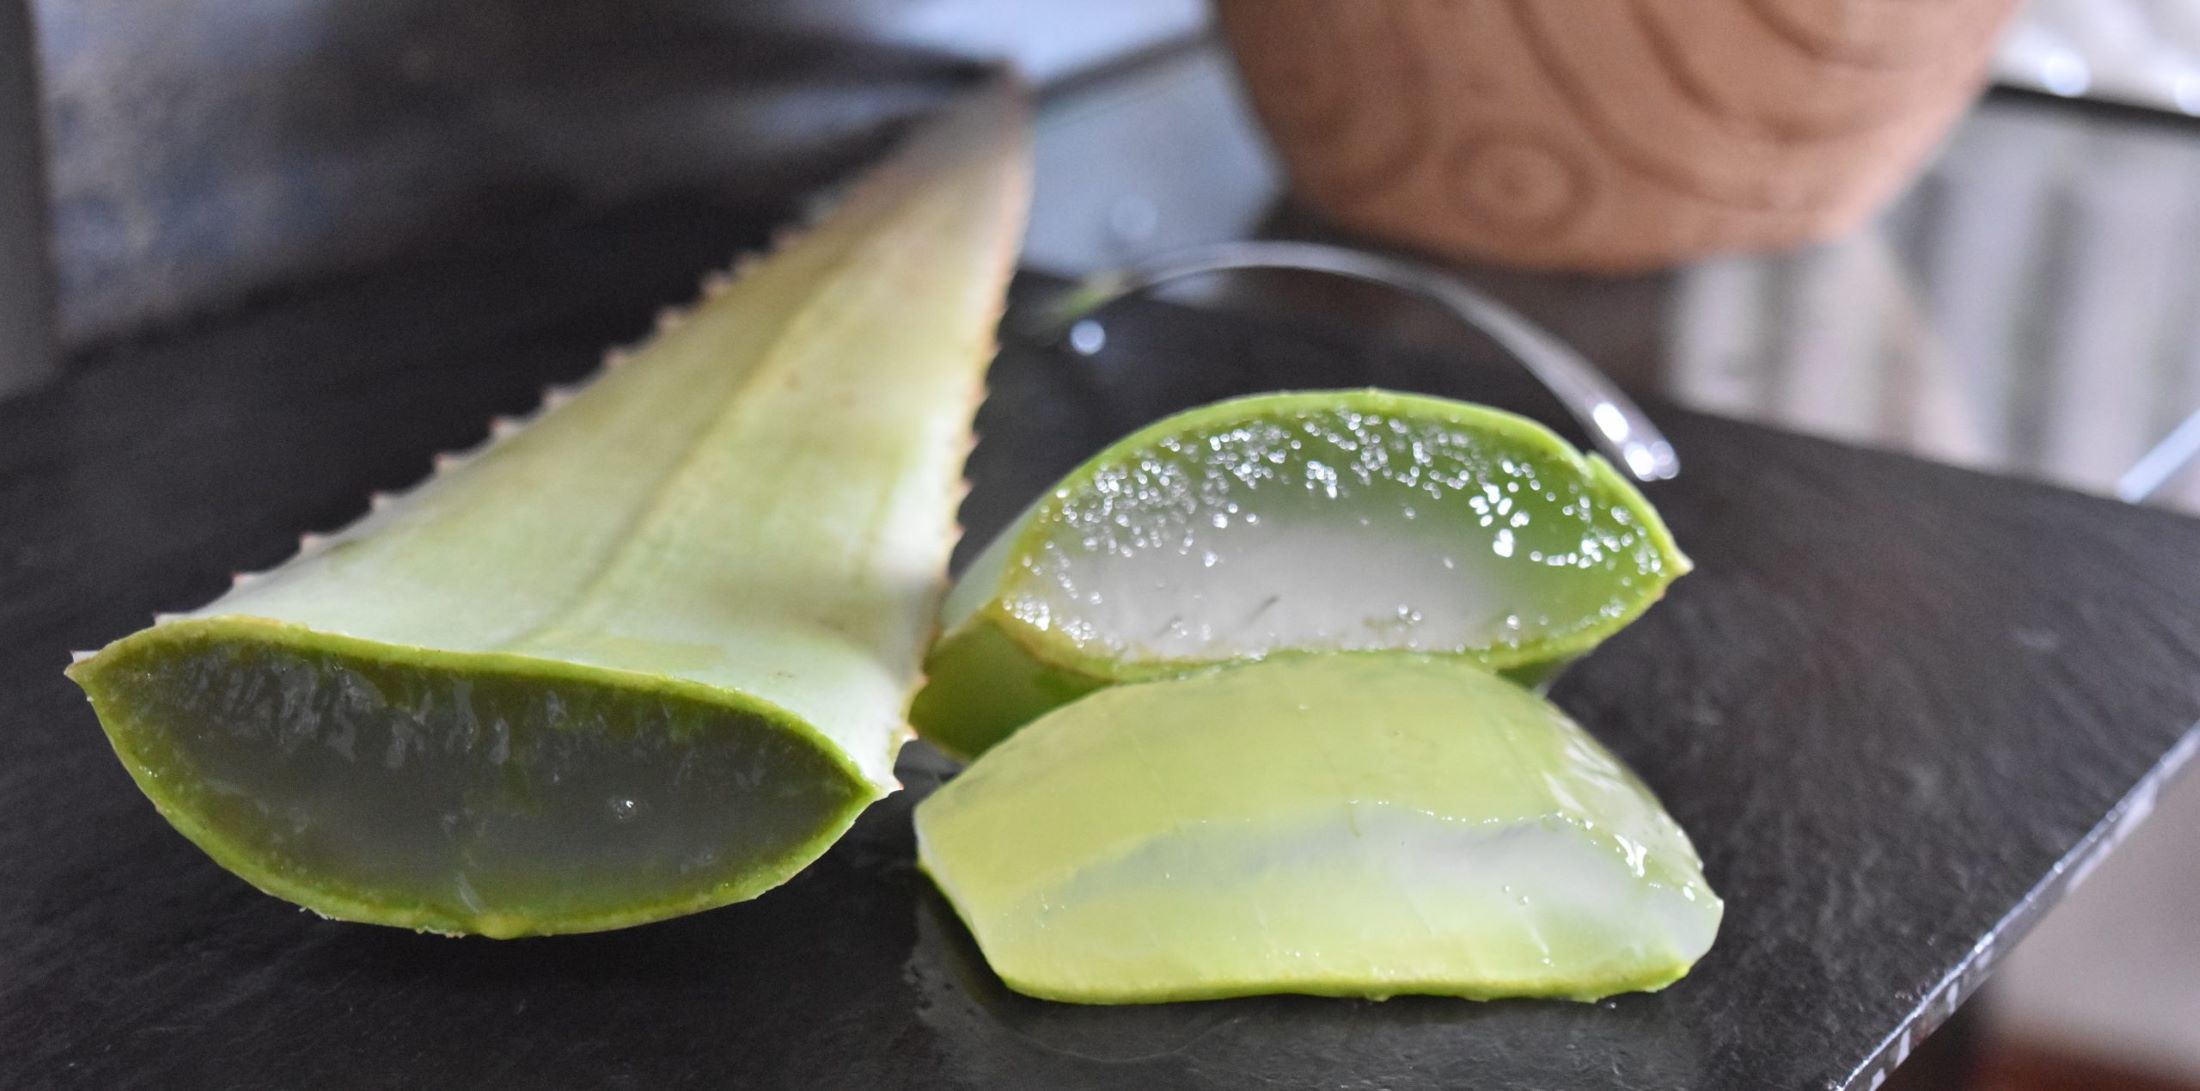 how-to-cut-aloe-vera-leaf-for-face